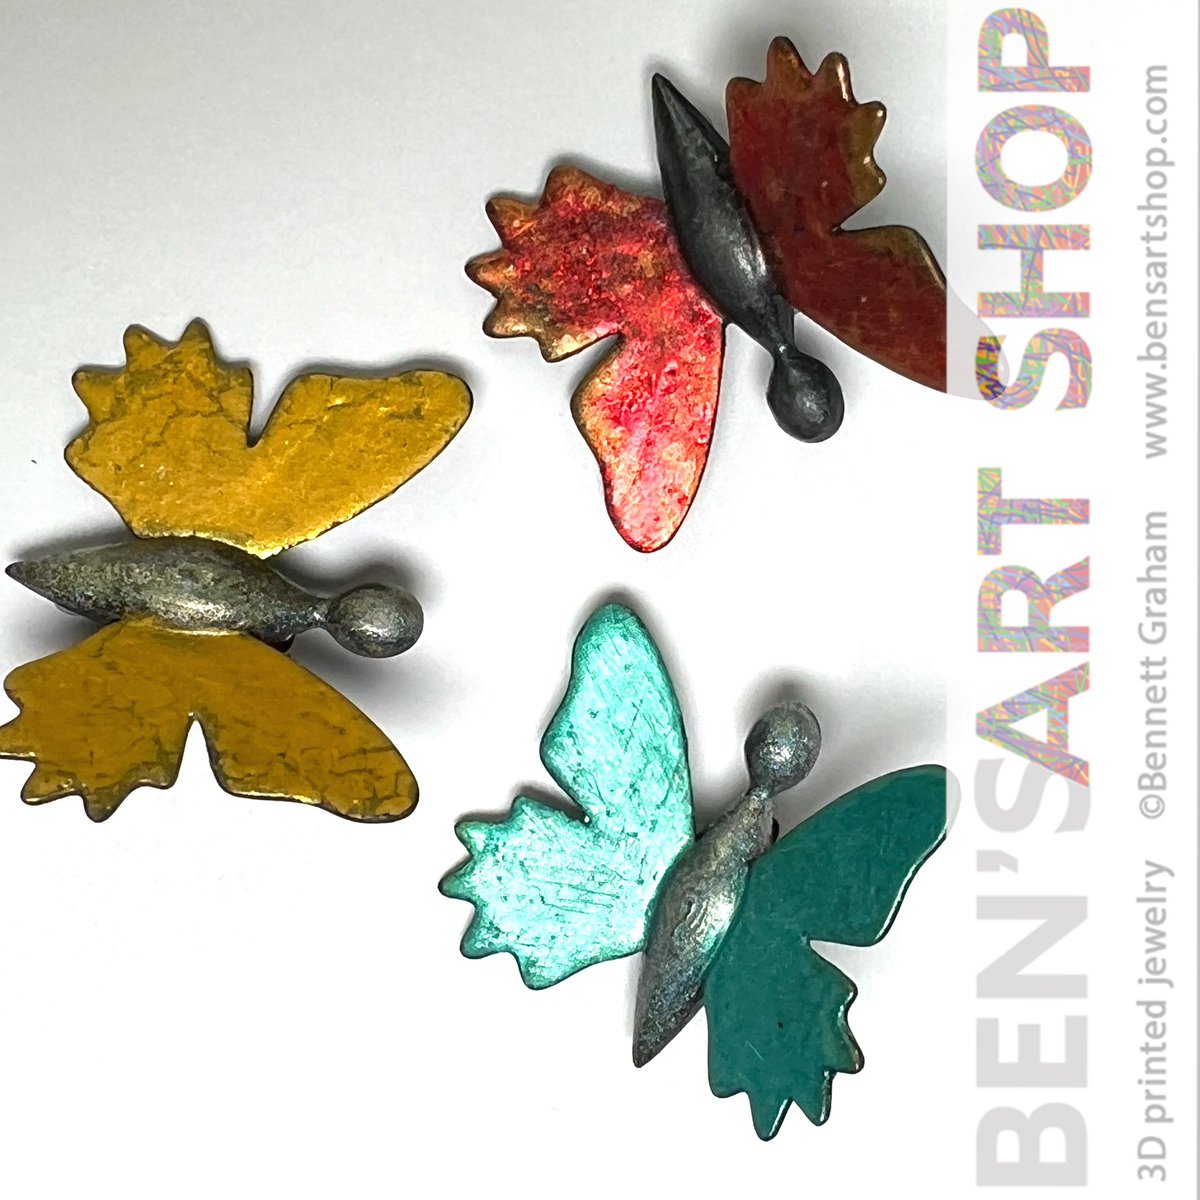 The swarm begins. Spring fever means the butterfly pins are coming to life at the Art Shop! #butterfly #butterflies🦋 #butterflyjewelry